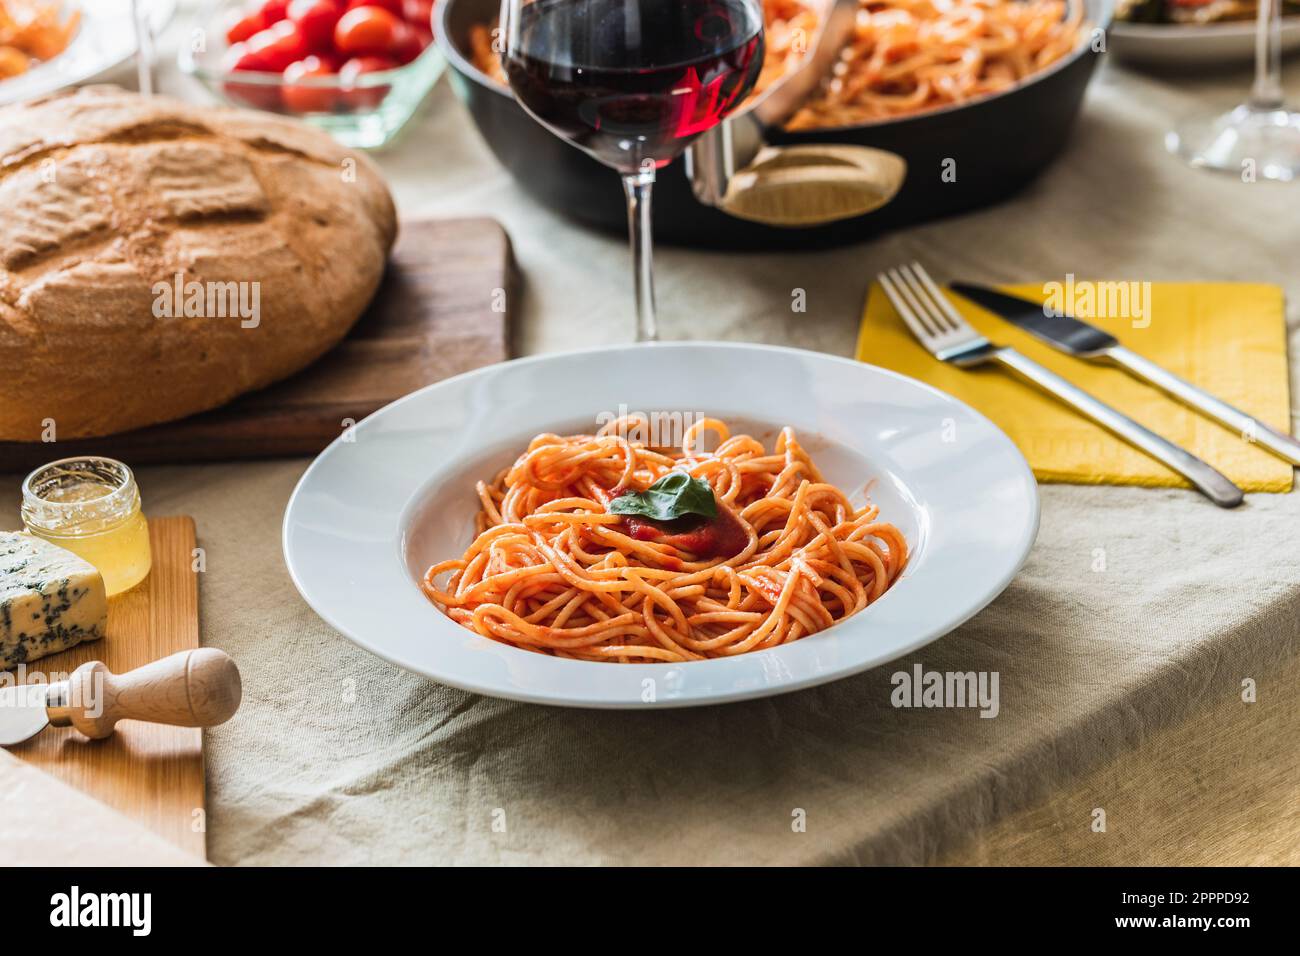 Table setting with selective focus on a plate of spaghetti with tomato sauce. Bread, cutlery and glass of red wine in the background Stock Photo